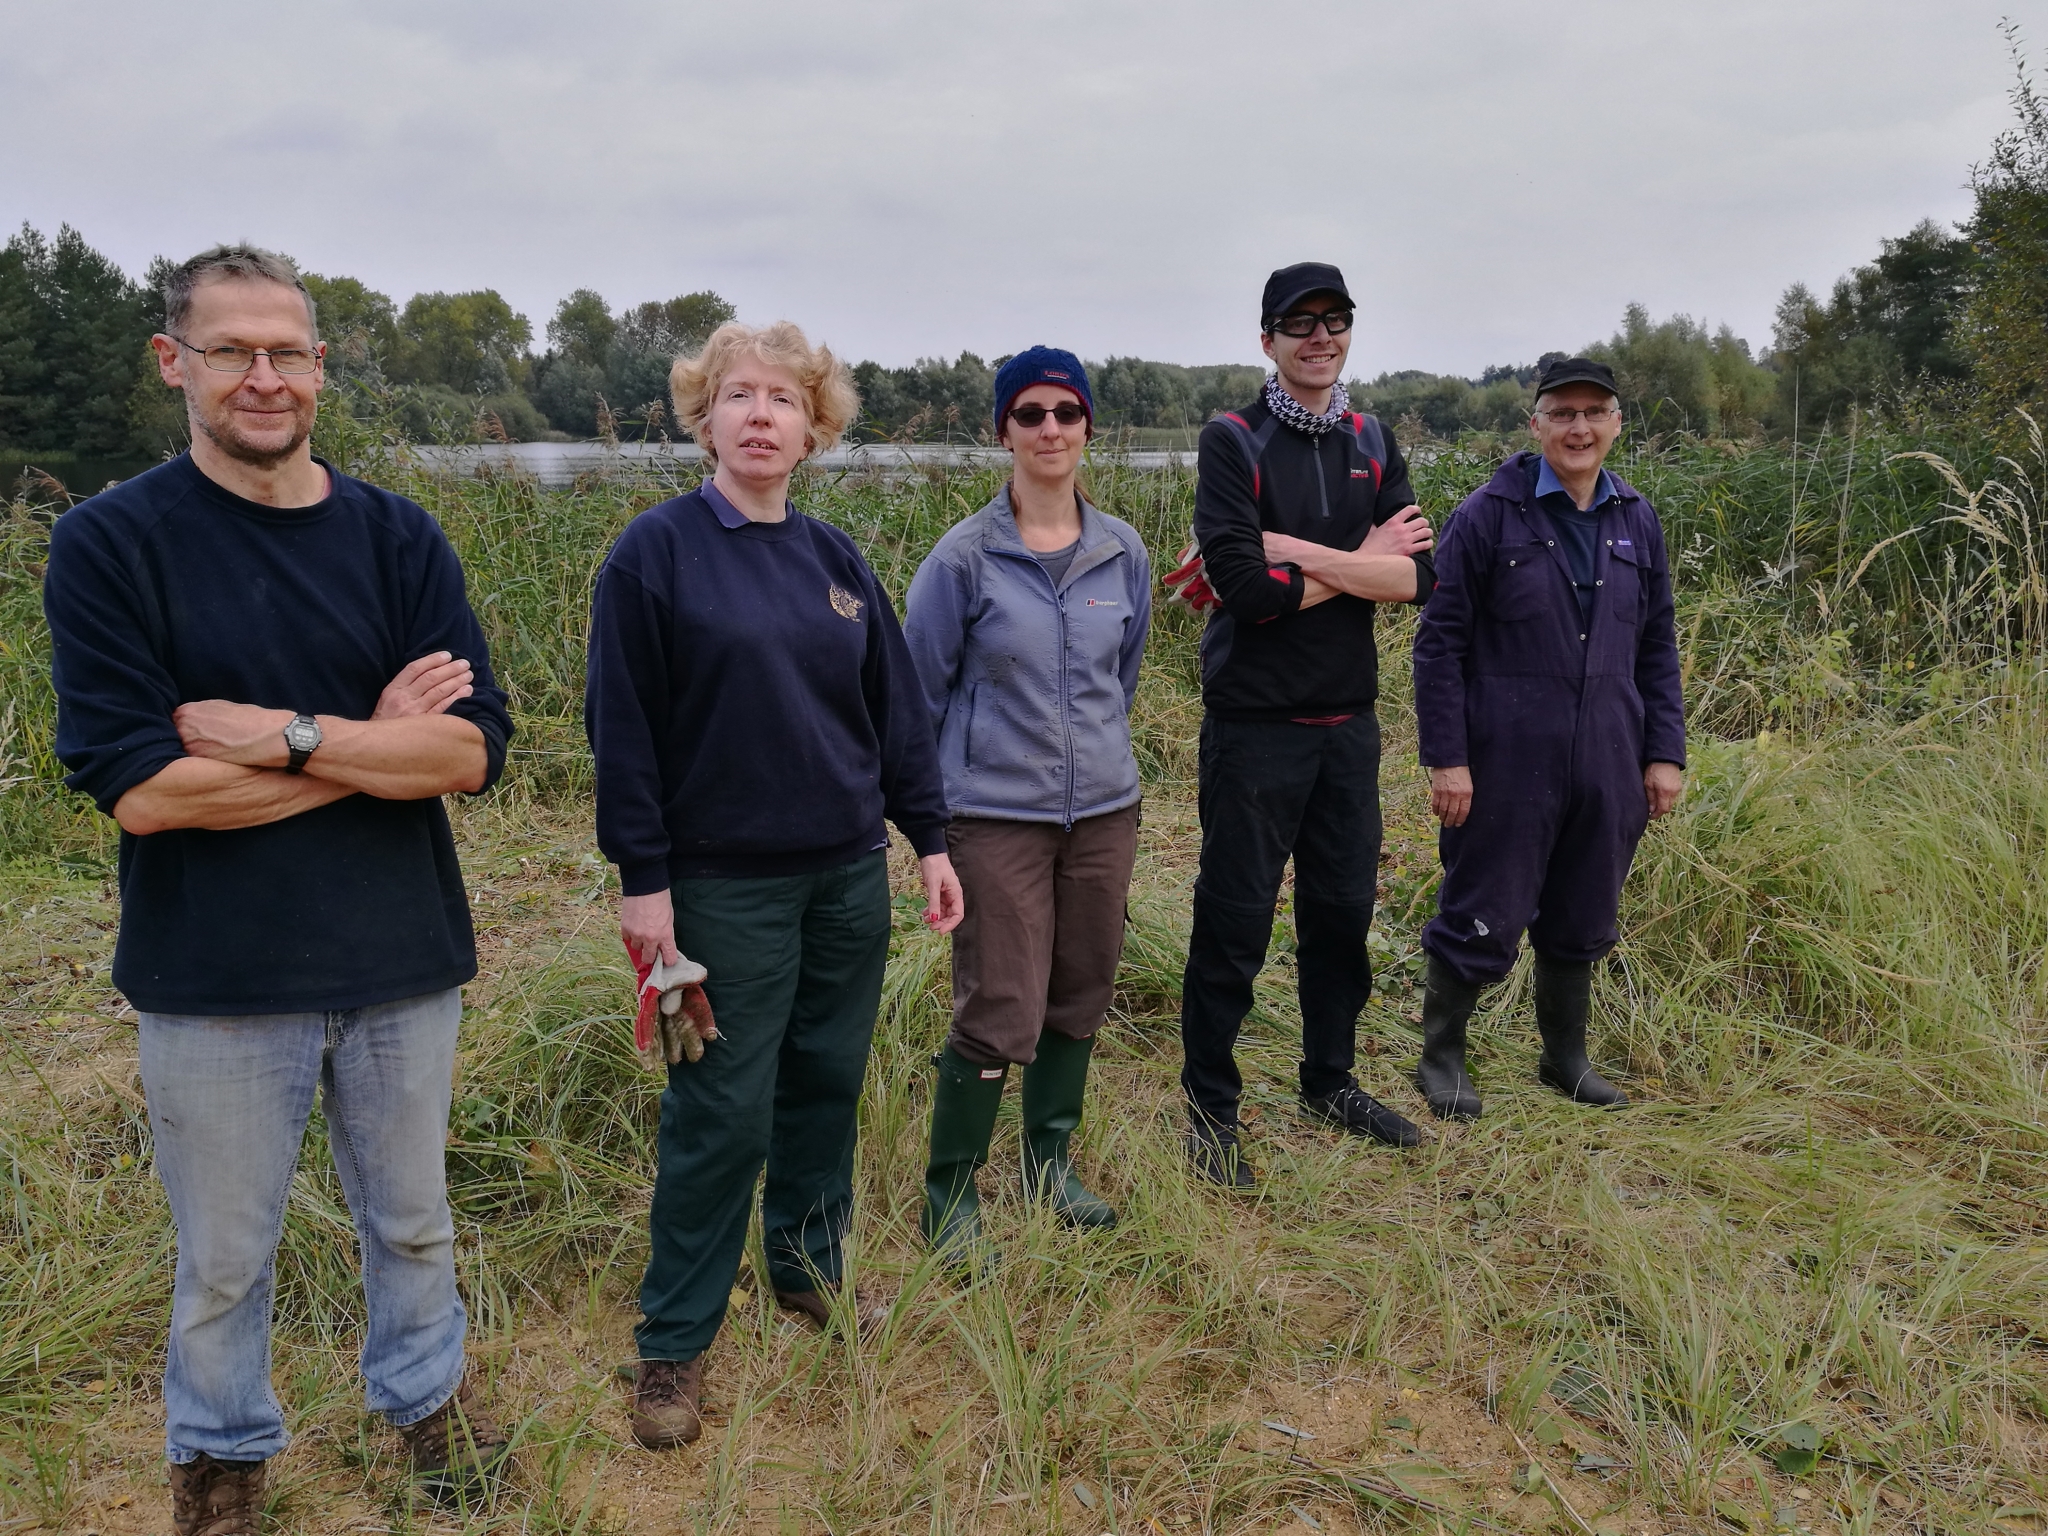 A photo from the FoTF Conservation Event - October 2021 - Coppicing and collecting material for wildlife screen : A group photo of some of the FoTF Conservation volunteers who attended